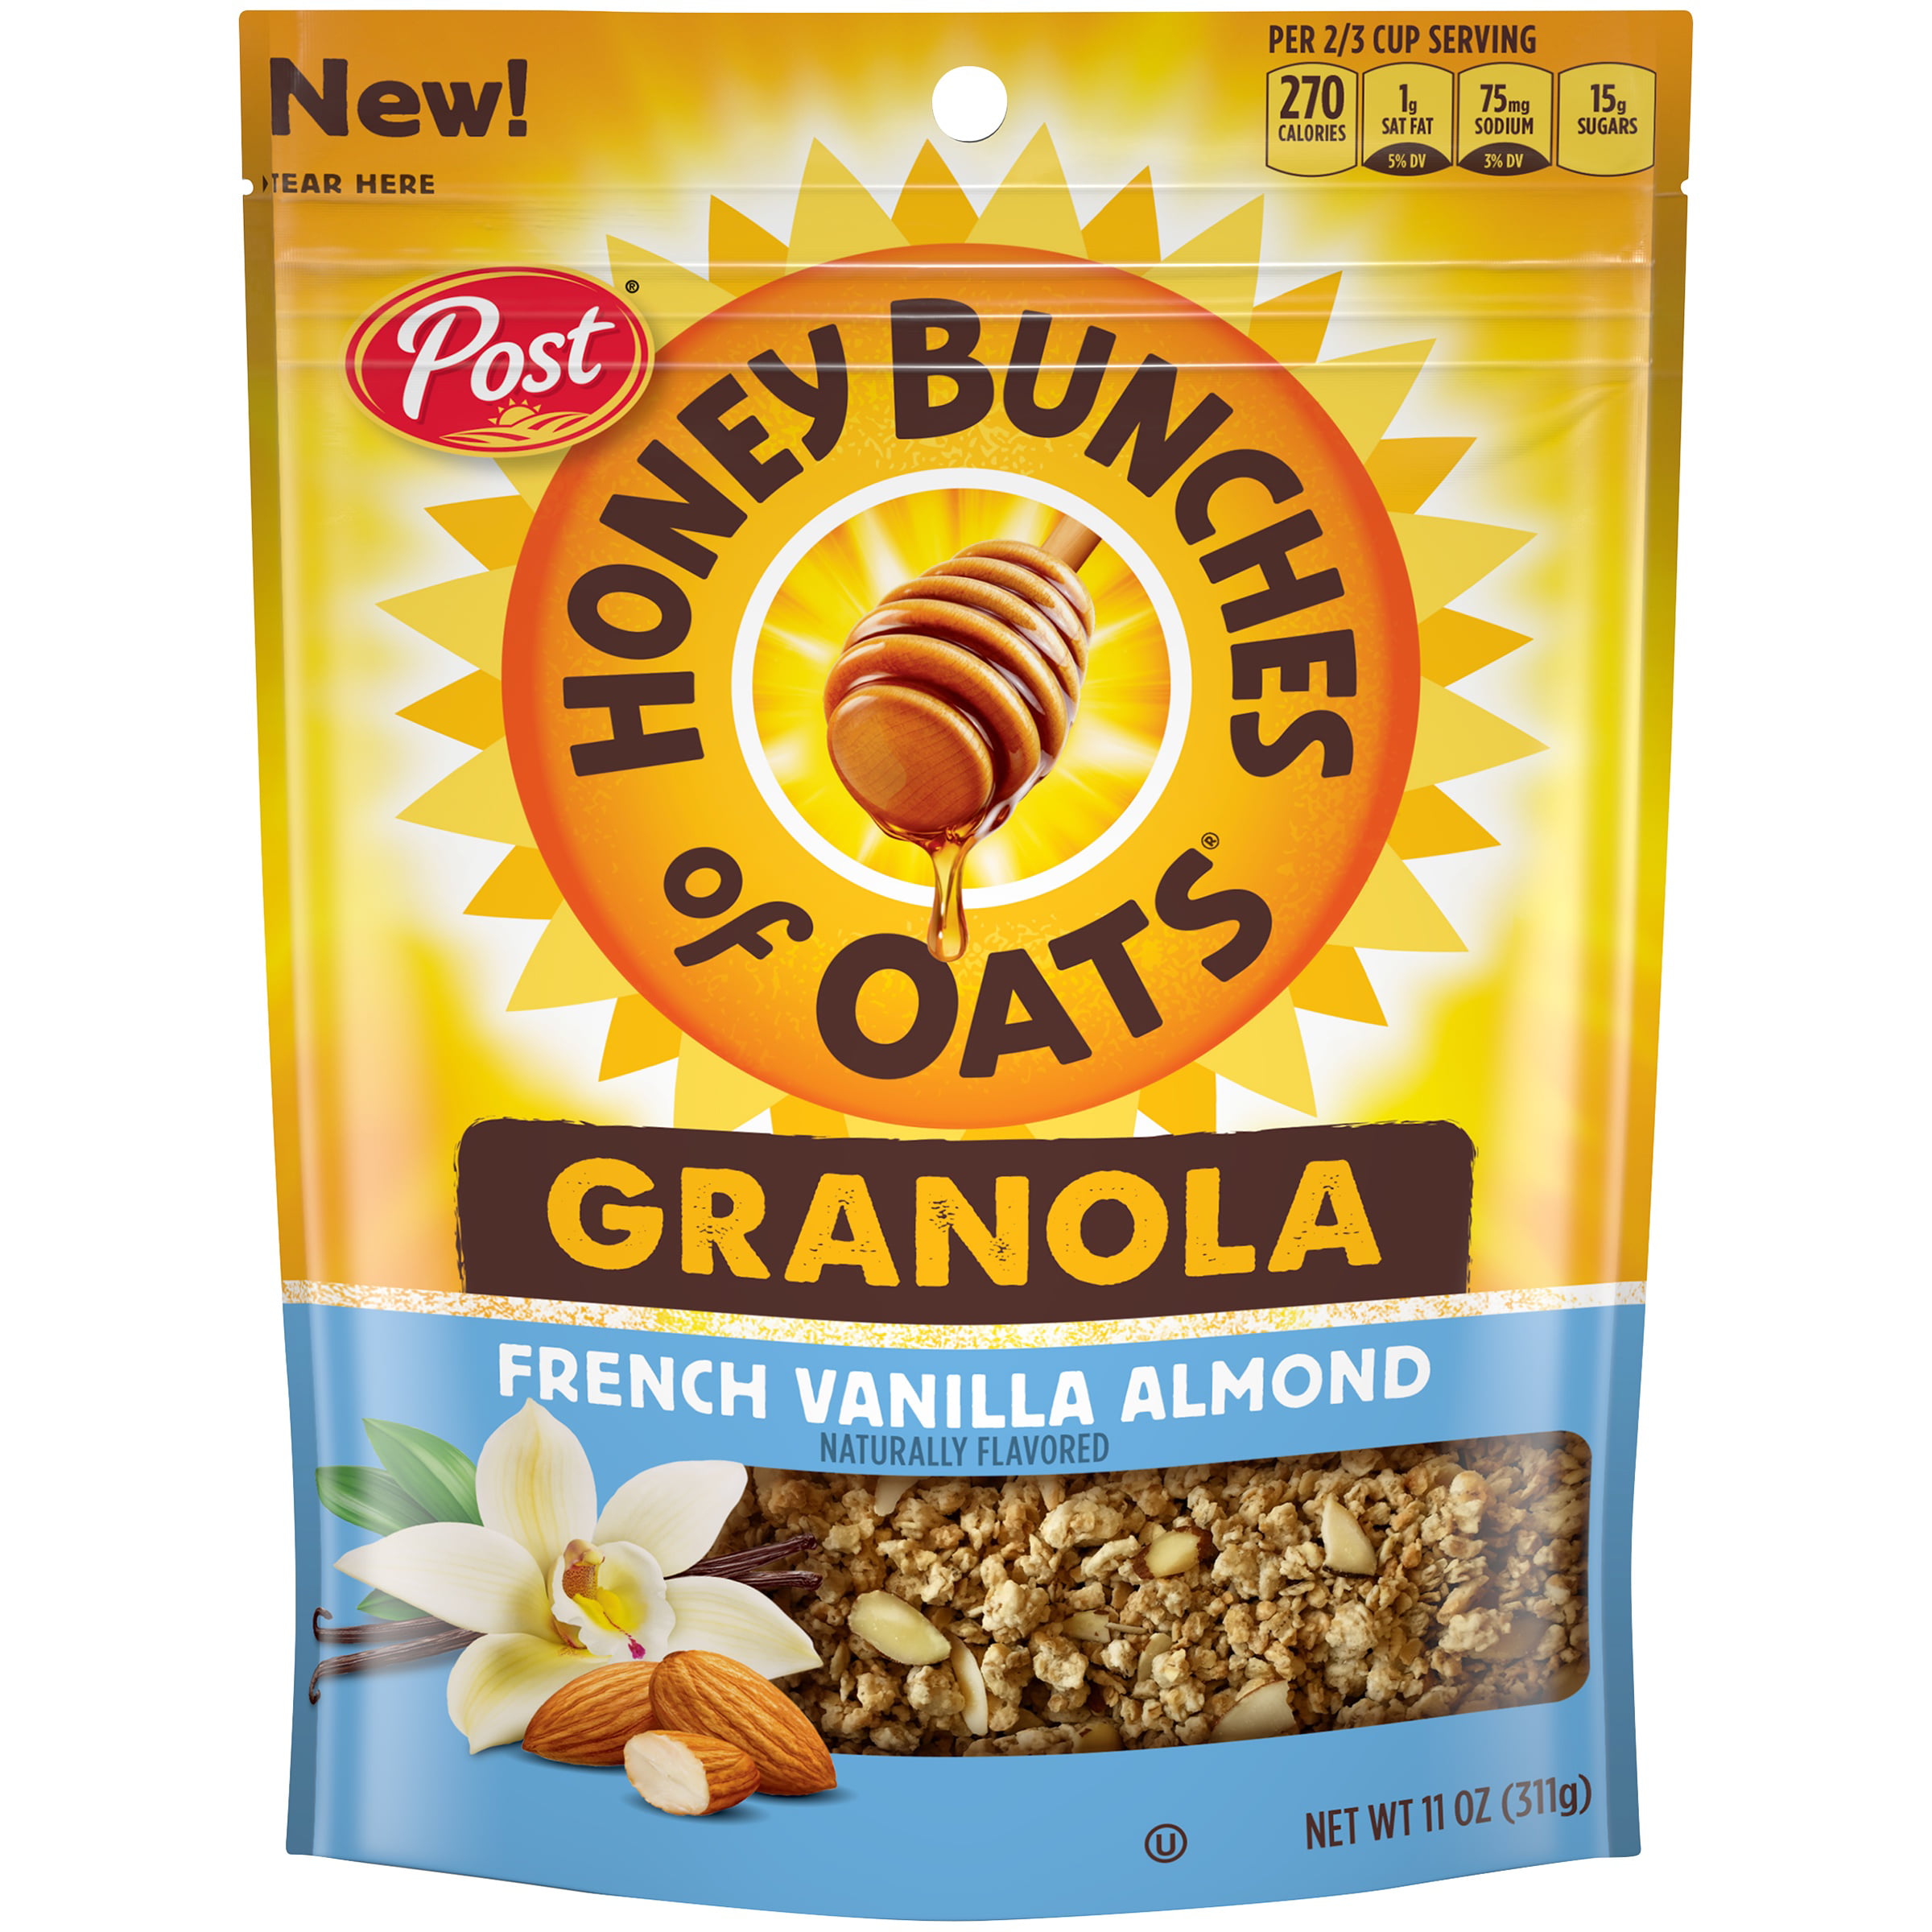 Post Honey Bunches of Oats, Granola, French Vanilla Almond ...